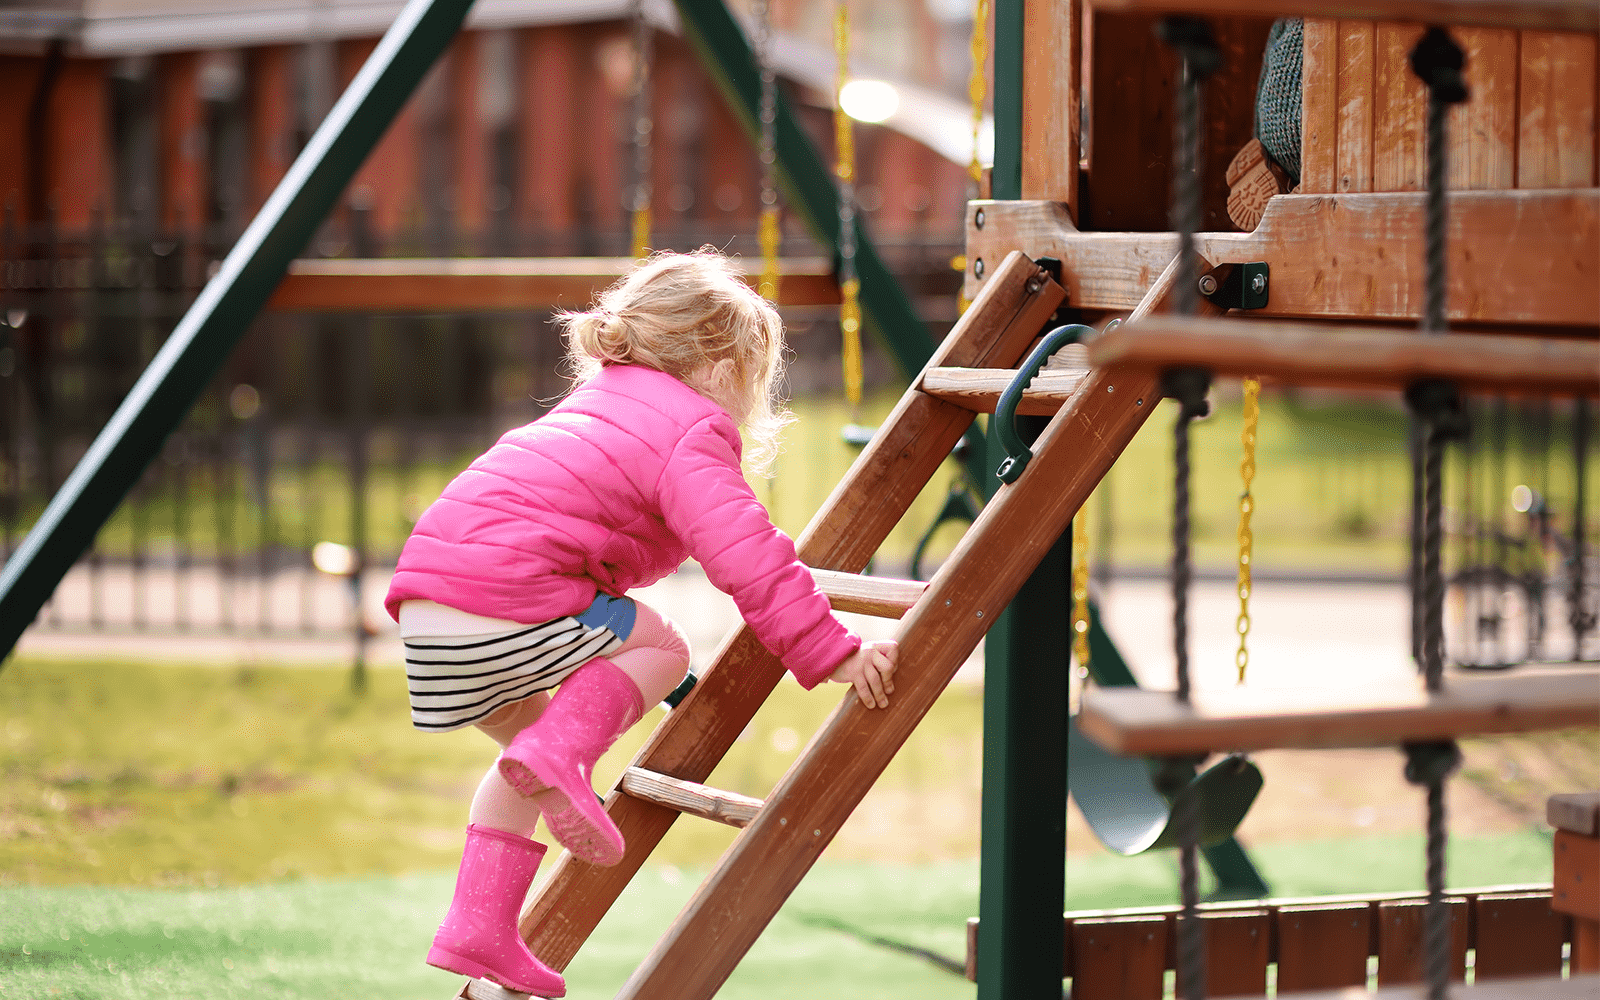 Little Girl in Pink Rain Boots on Playground